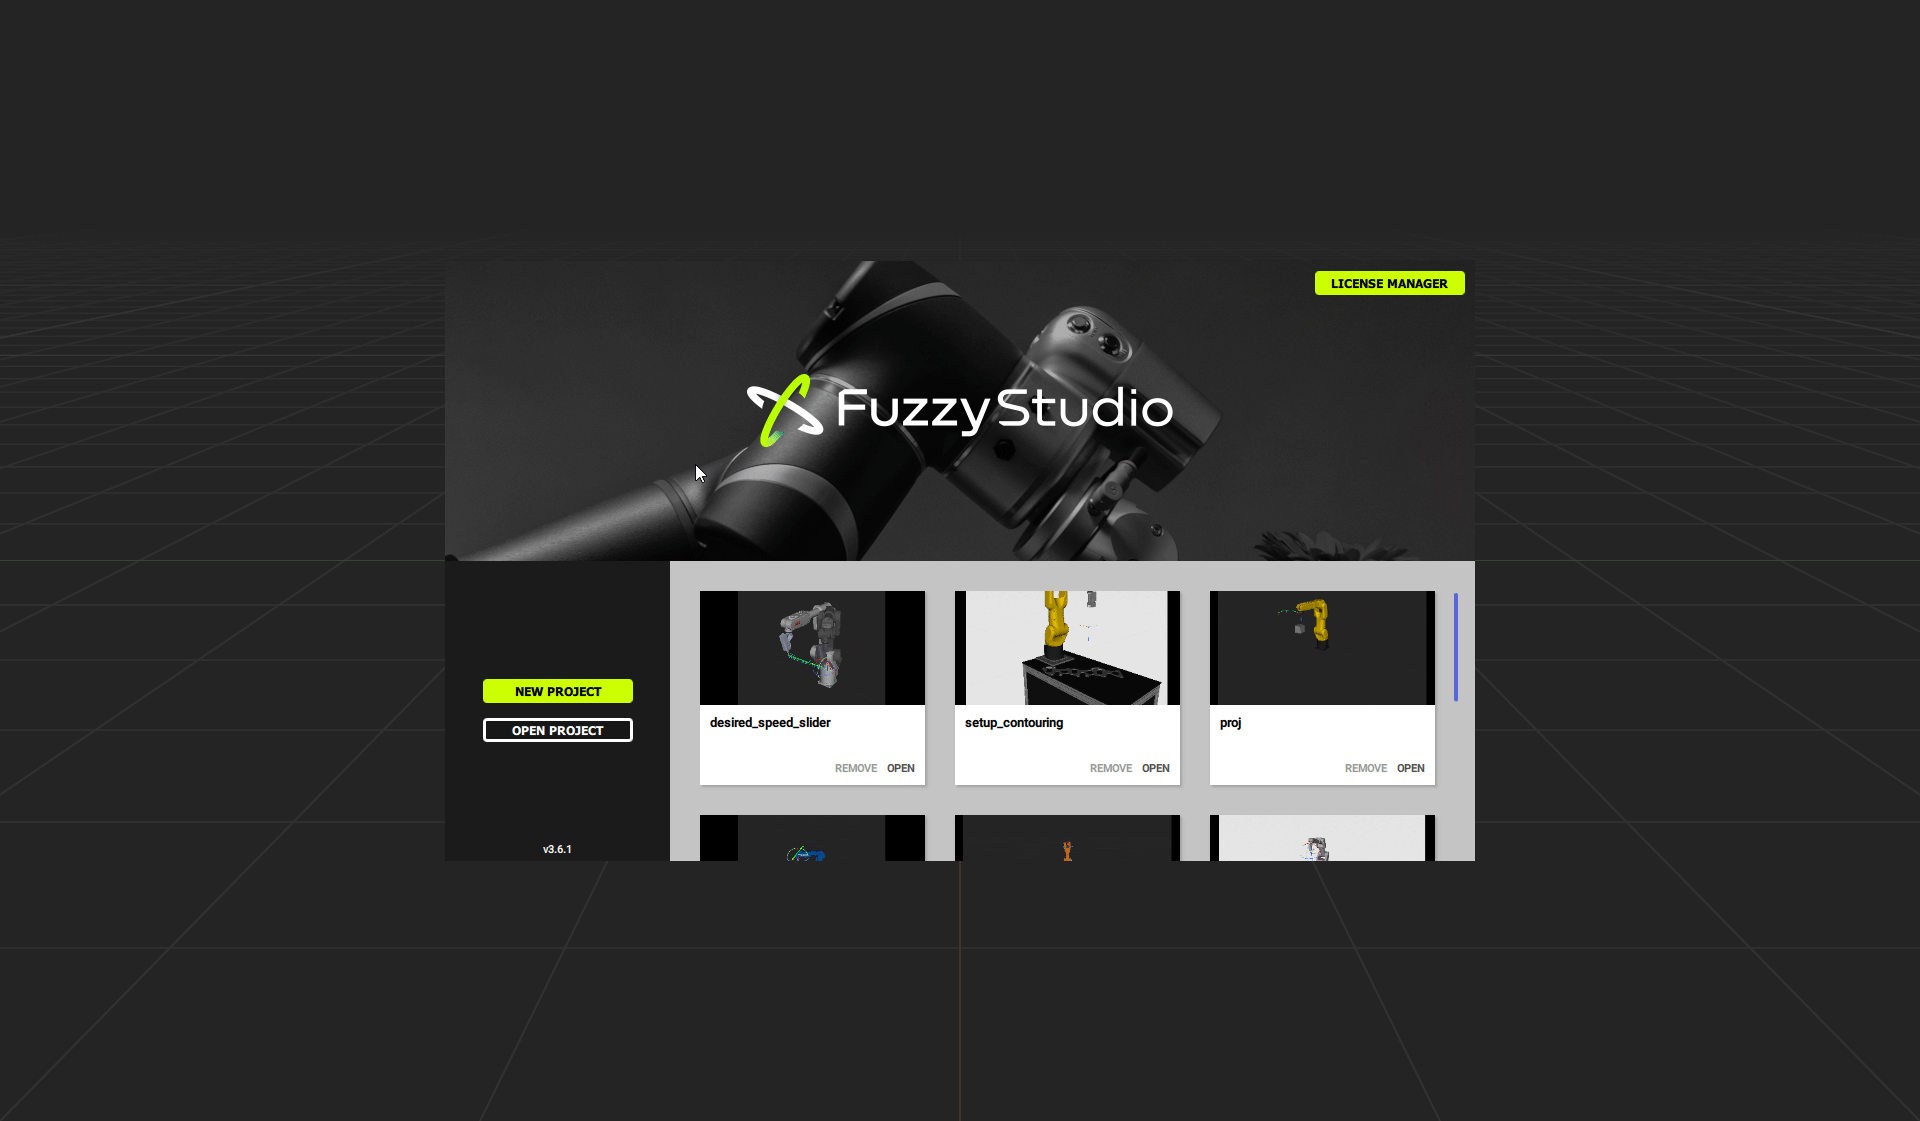 Create a new project in the Fuzzy Studio dashboard. 